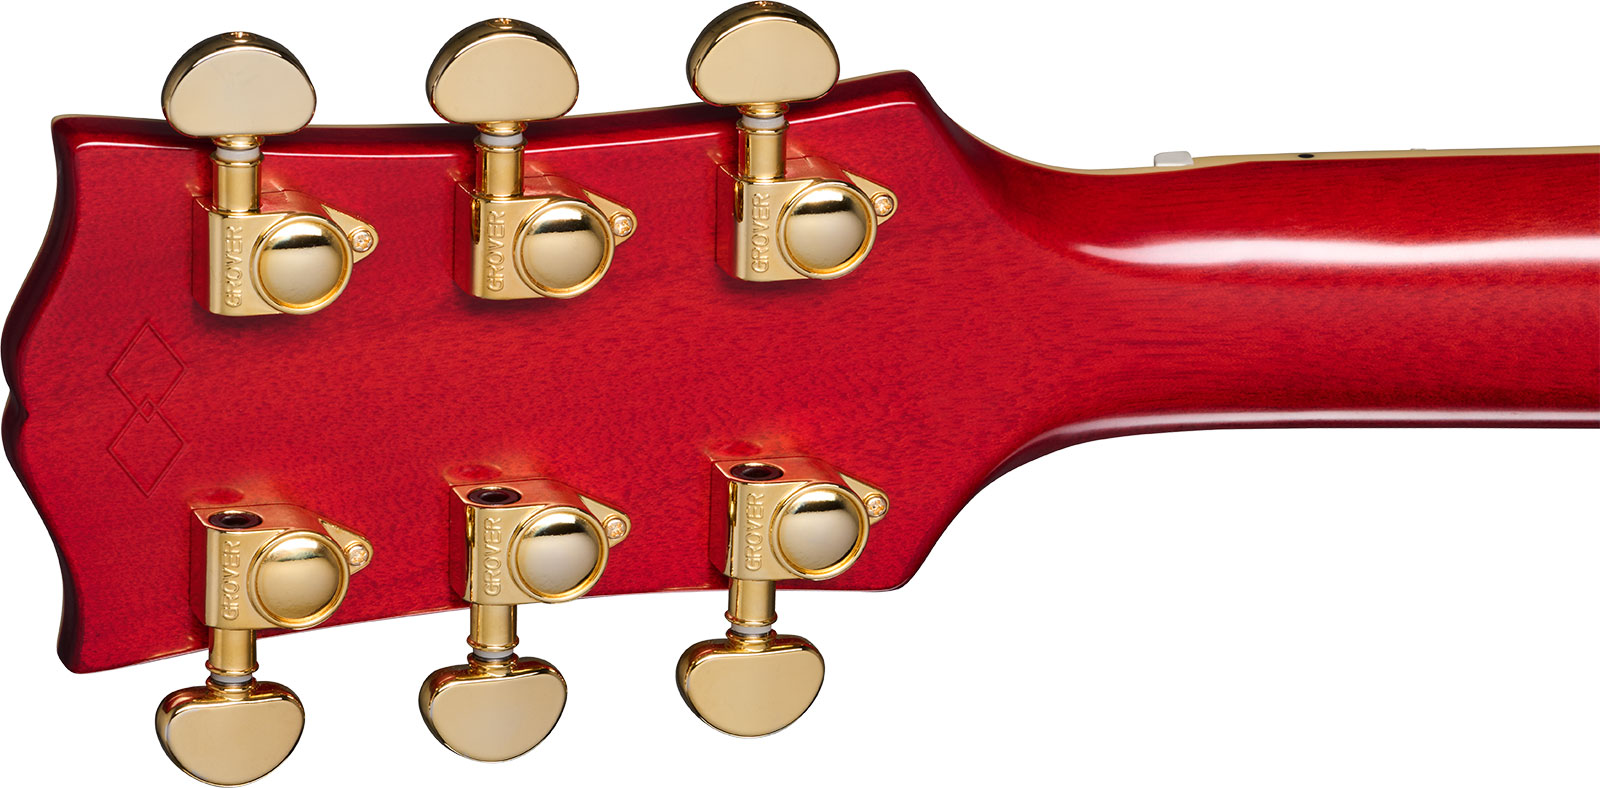 Epiphone Es355 1959 Inspired By 2h Gibson Ht Eb - Vos Cherry Red - Guitarra eléctrica semi caja - Variation 4